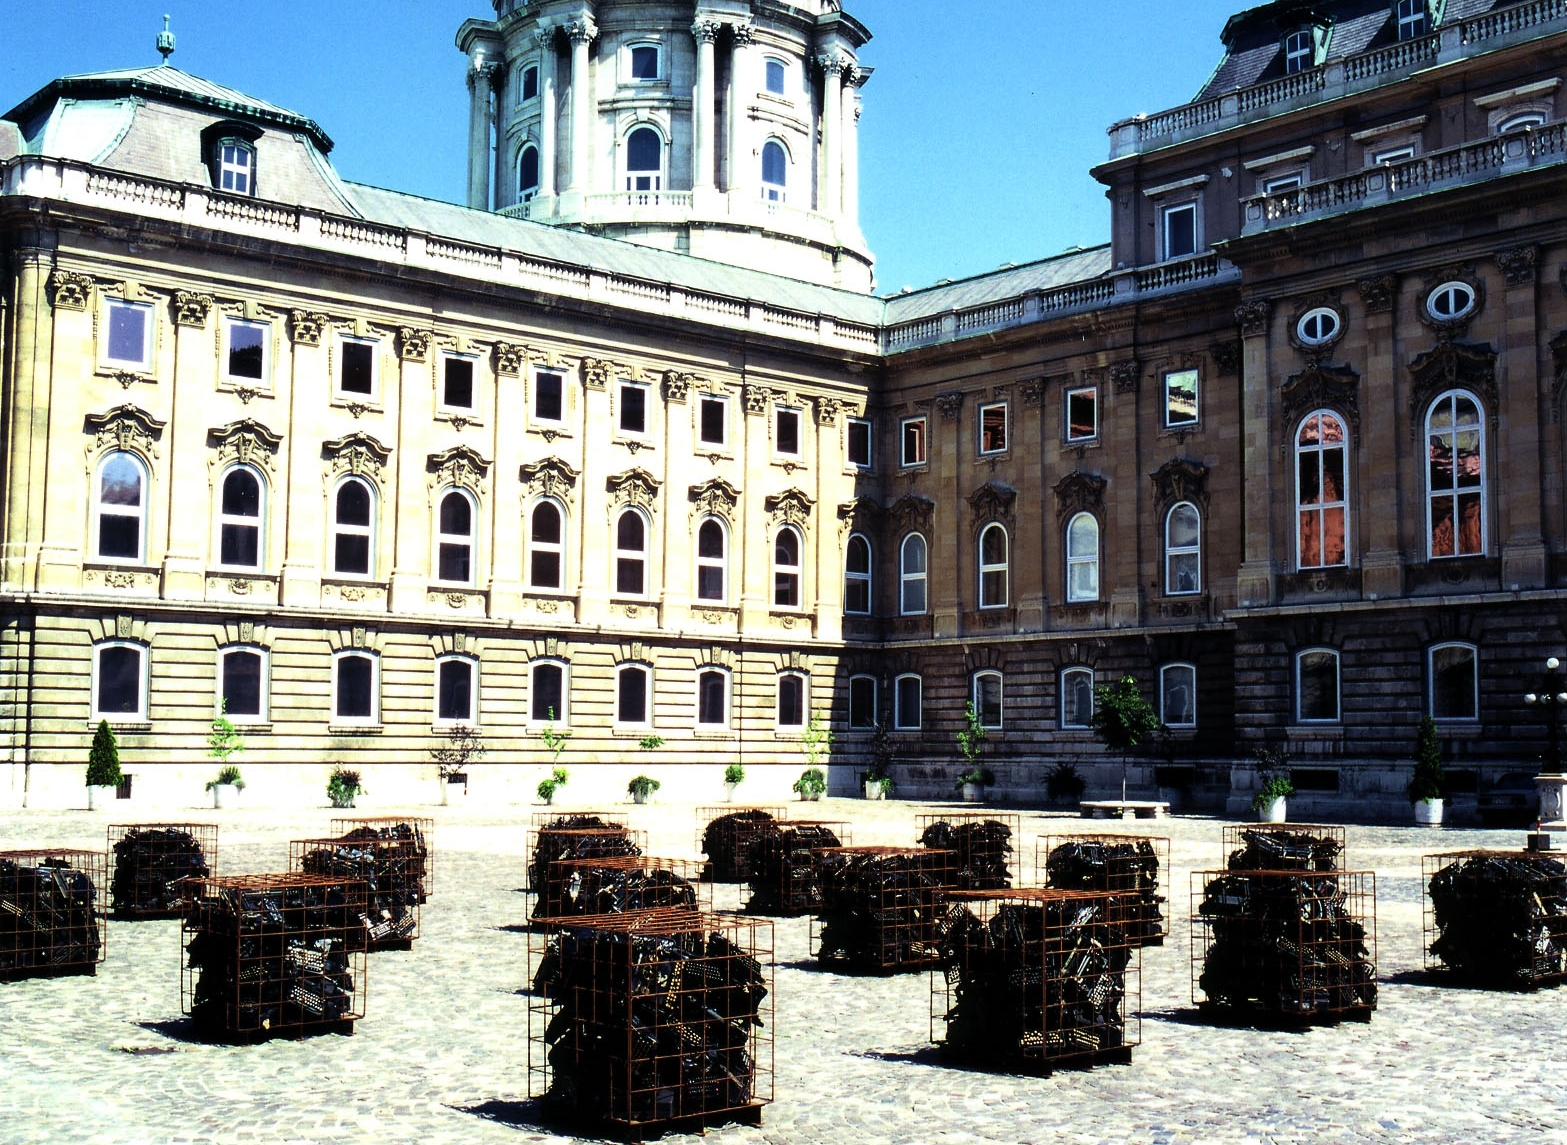  Lions’ Courtyard, Buda Castle, Budapest, 2002, photo by Sheryl Oring 